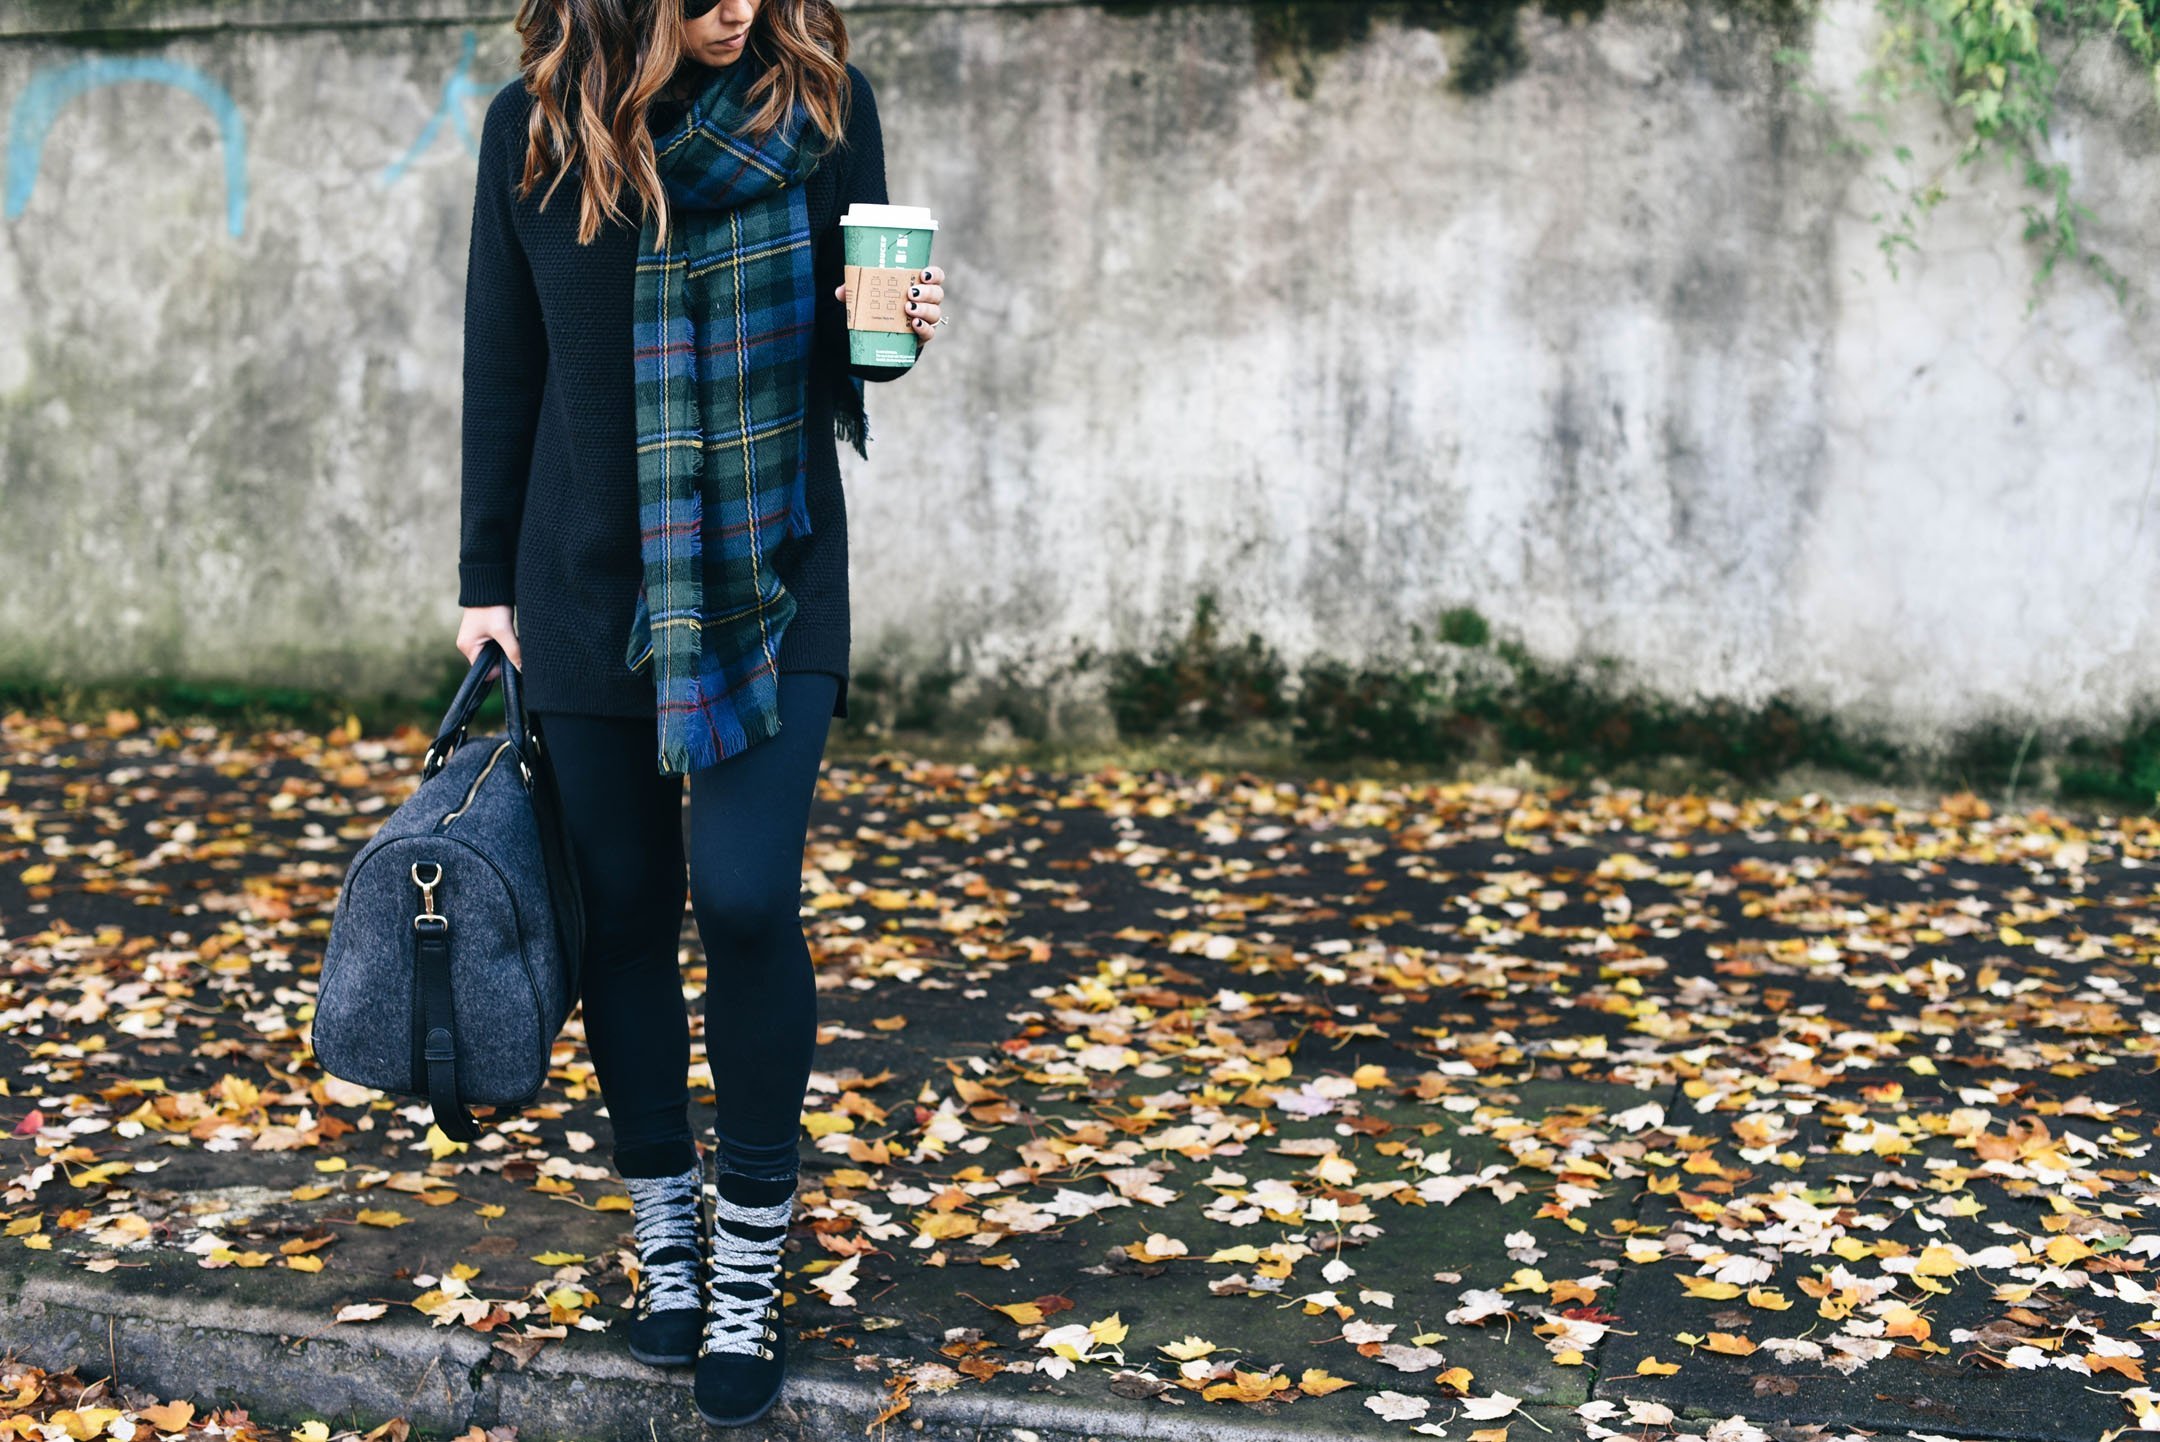 crystalin-marie-wearing-sole-society-plaid-green-scarf